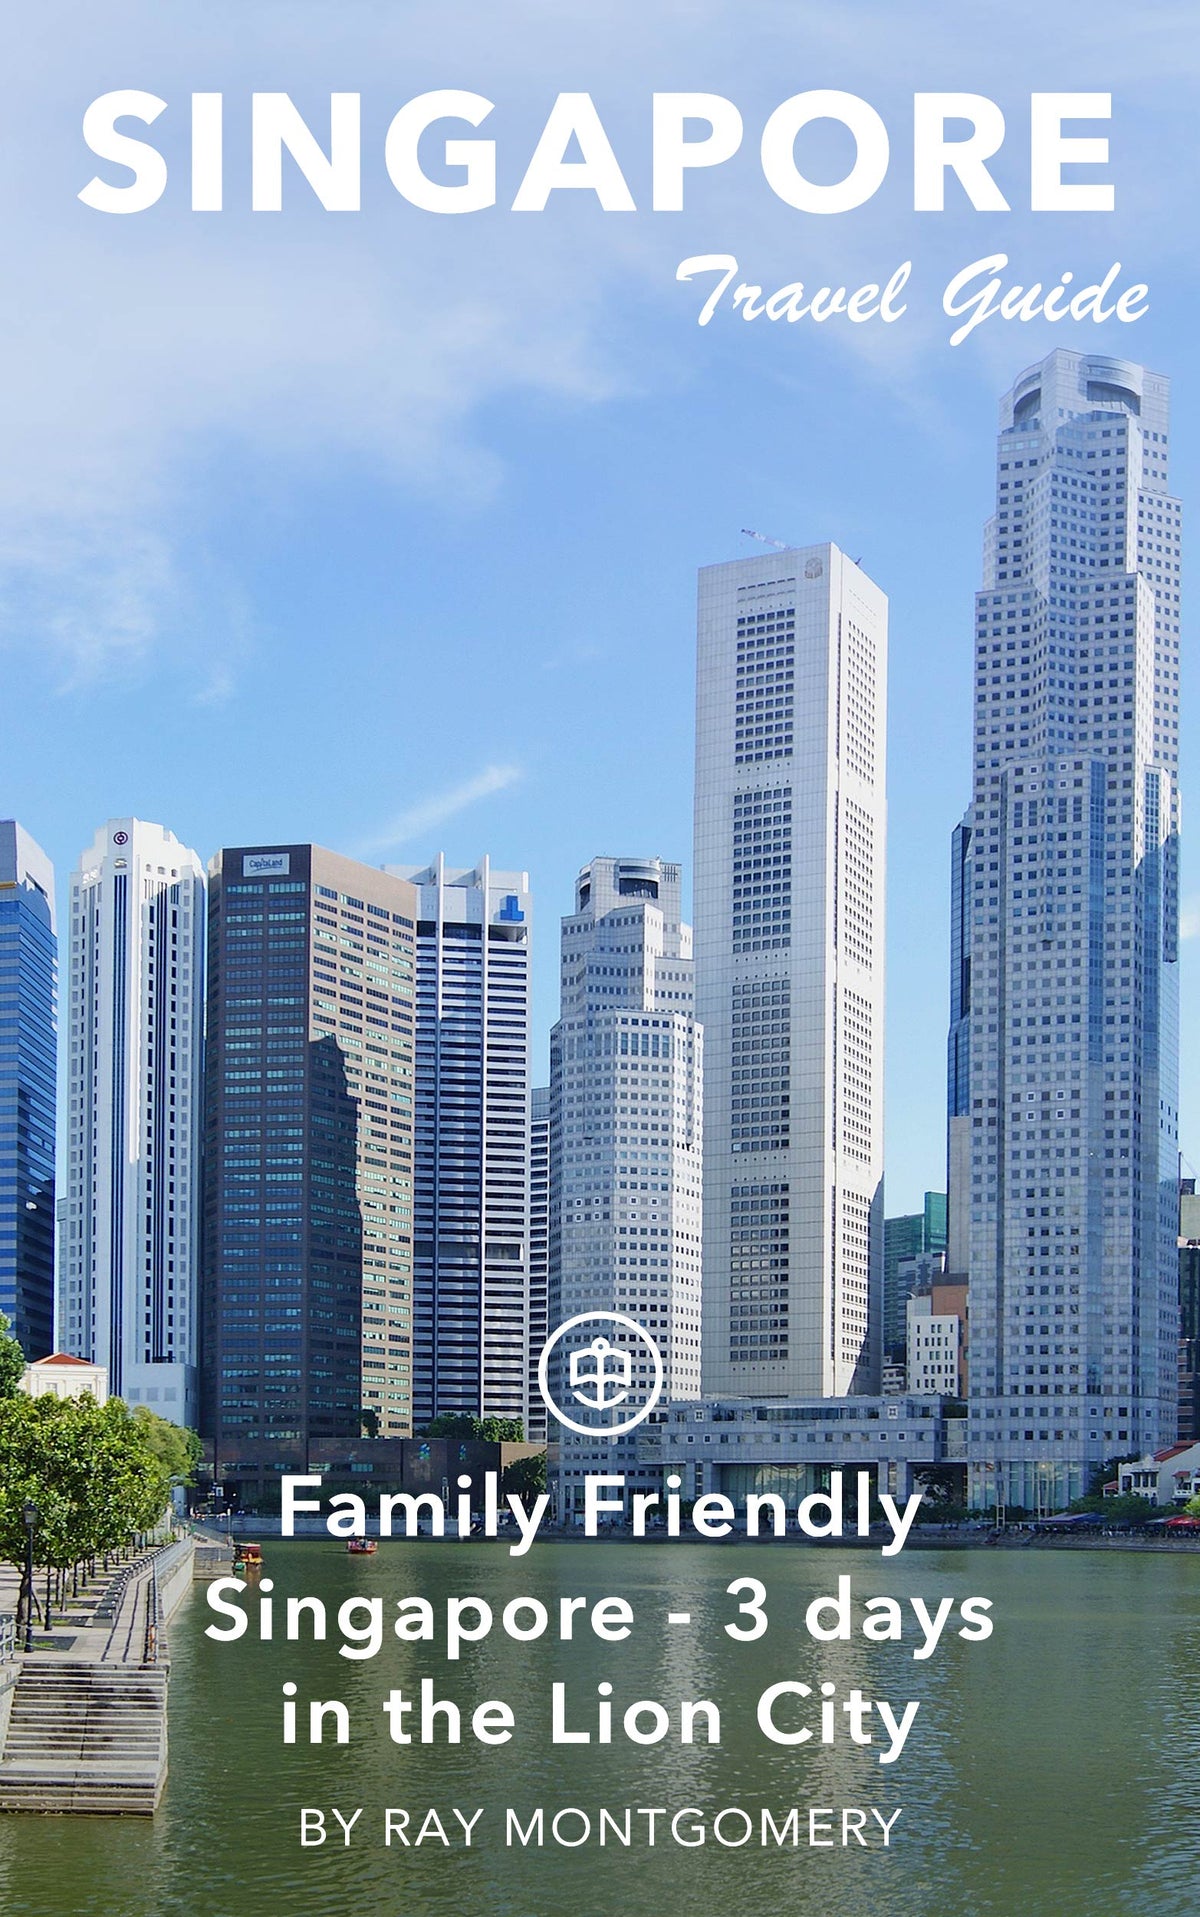 Family Friendly Singapore - 3 Days in the Lion City